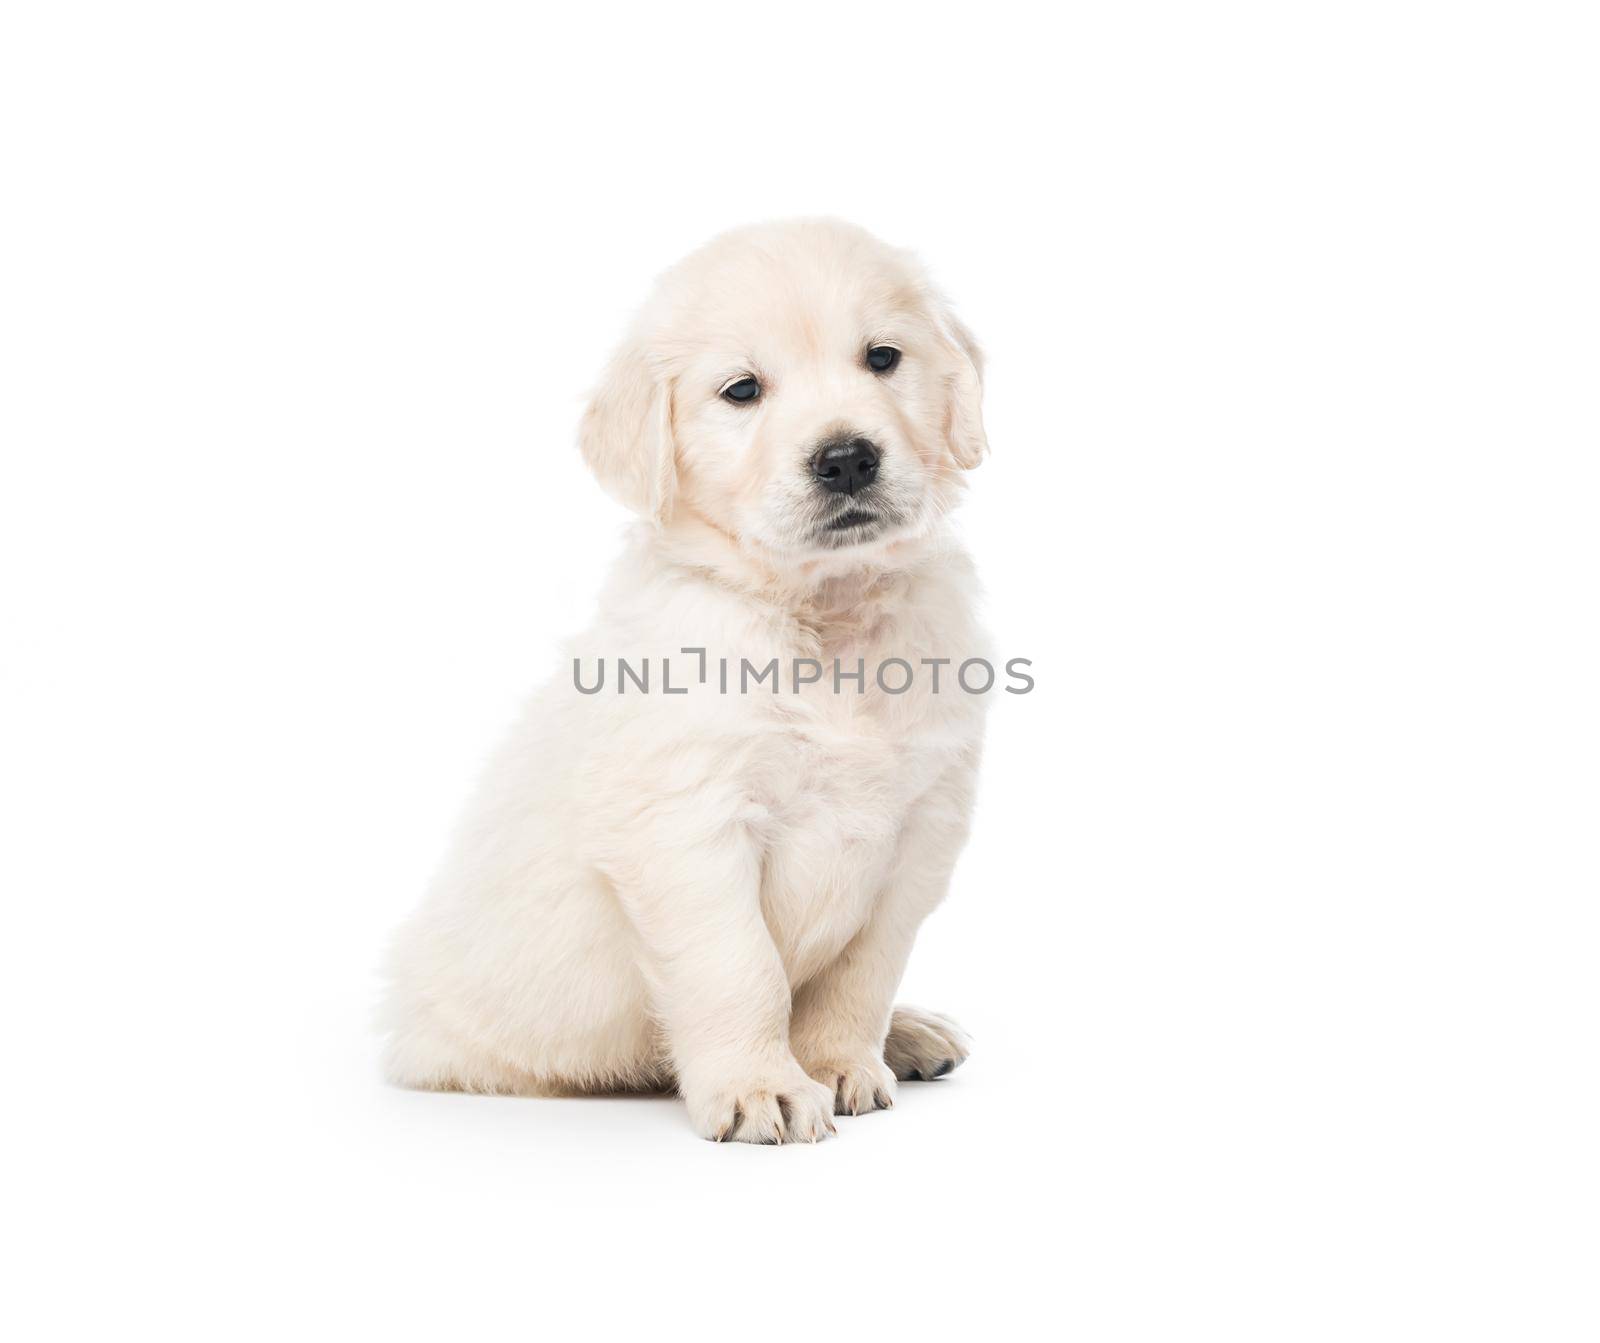 Cute little golden retriever puppy sitting isolated on white background